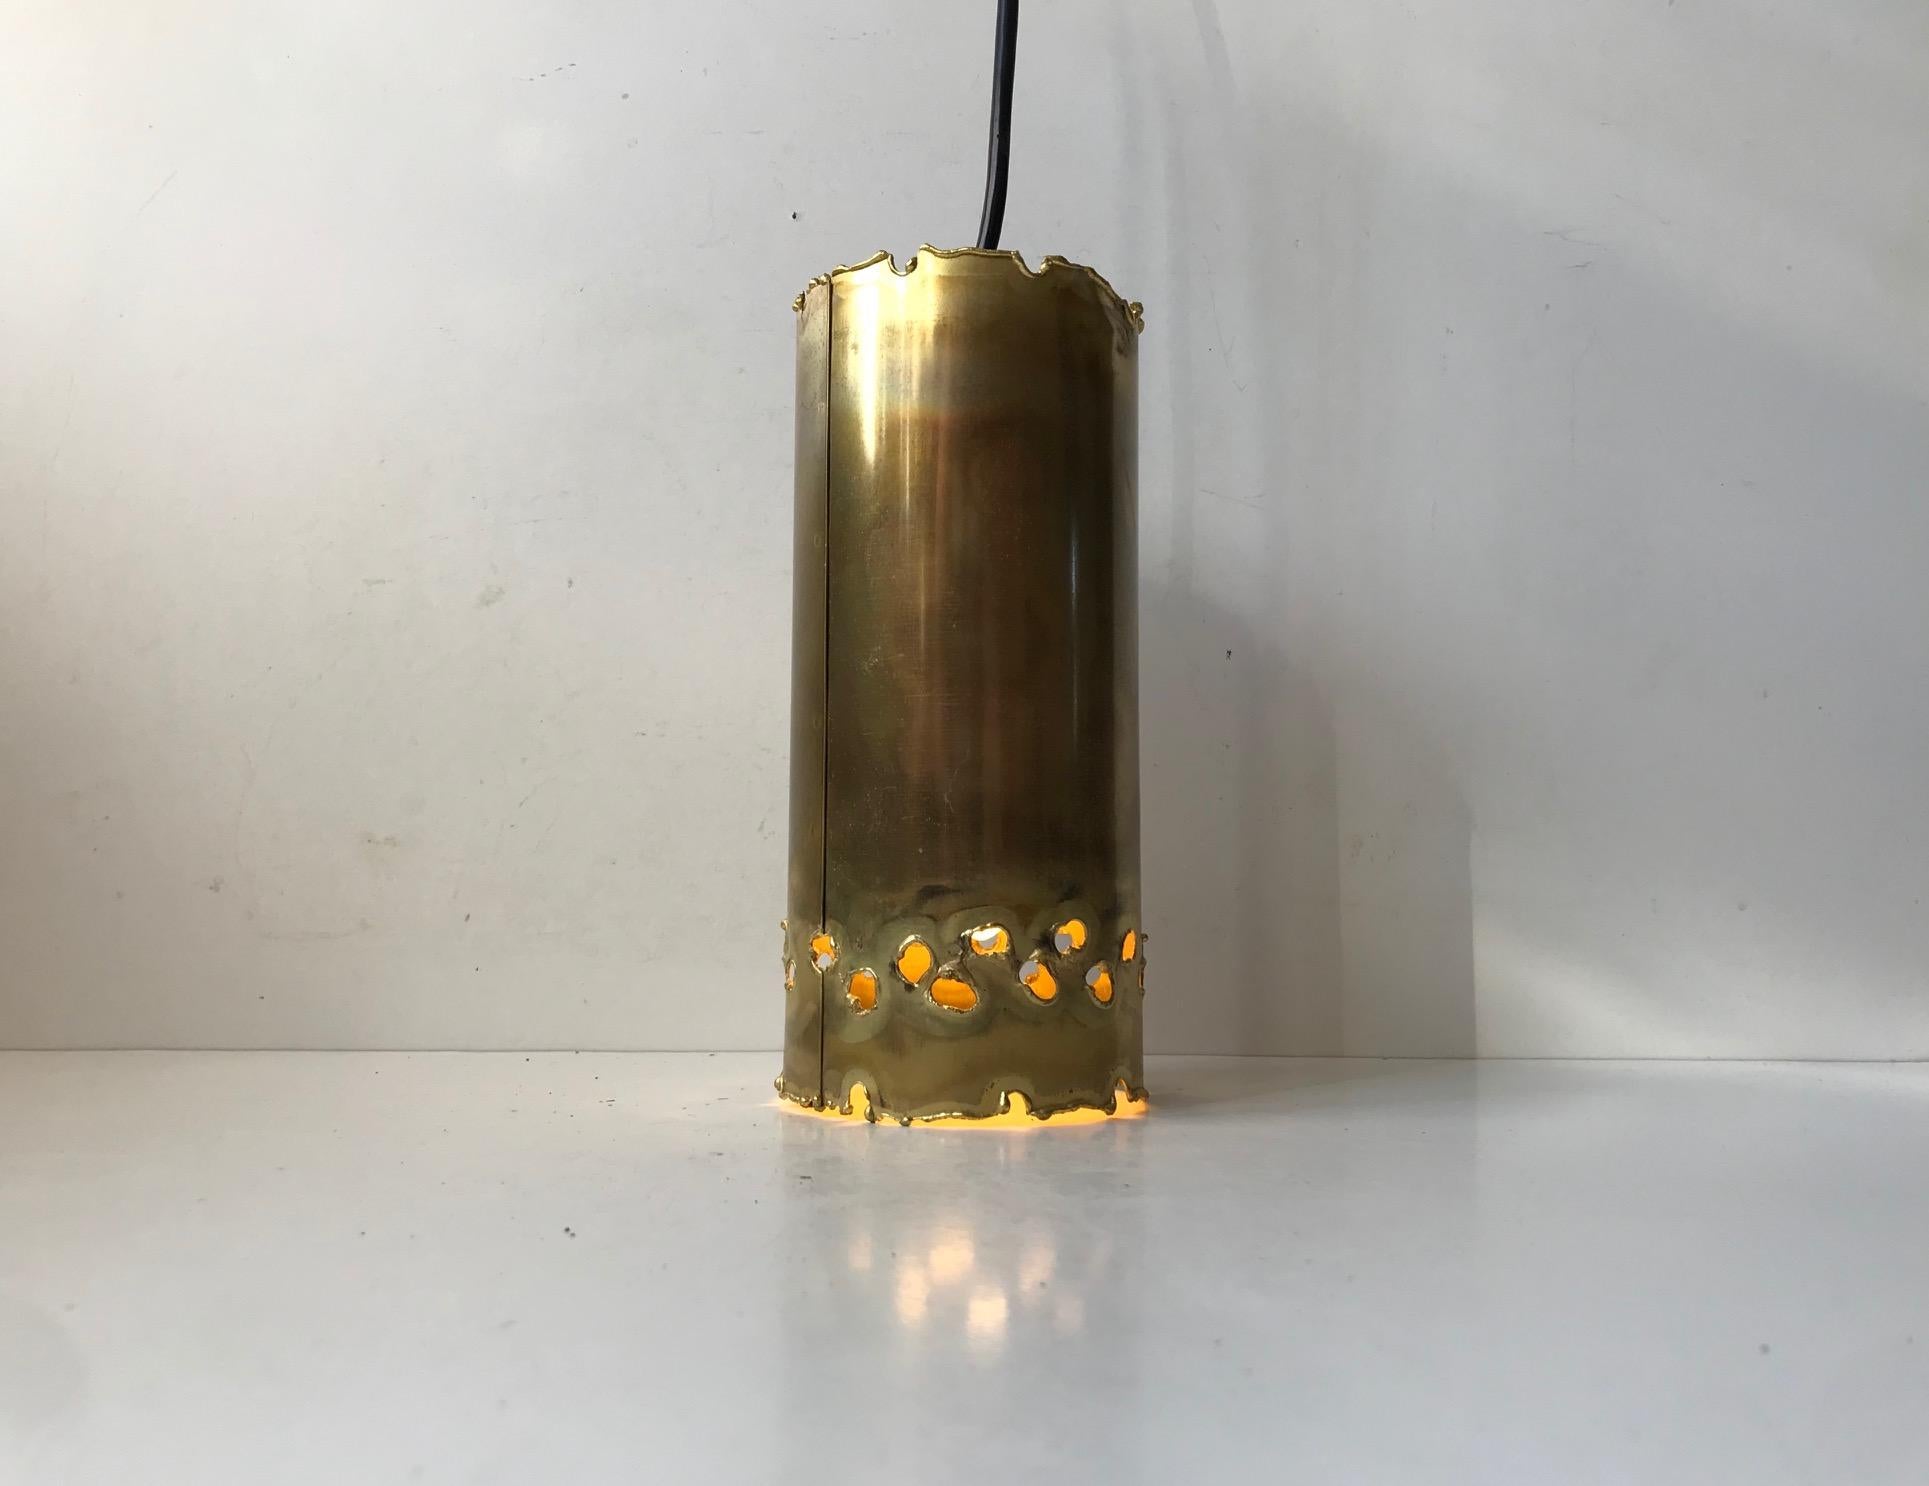 Acid treated and torch-cut pendant designed by Svend Aage Holm Sørensen in the early 1960s. Manufactured by Holm-Sørensen & Pedersen in Denmark, circa 1970. Makers mark present to the black canopy that will come along.